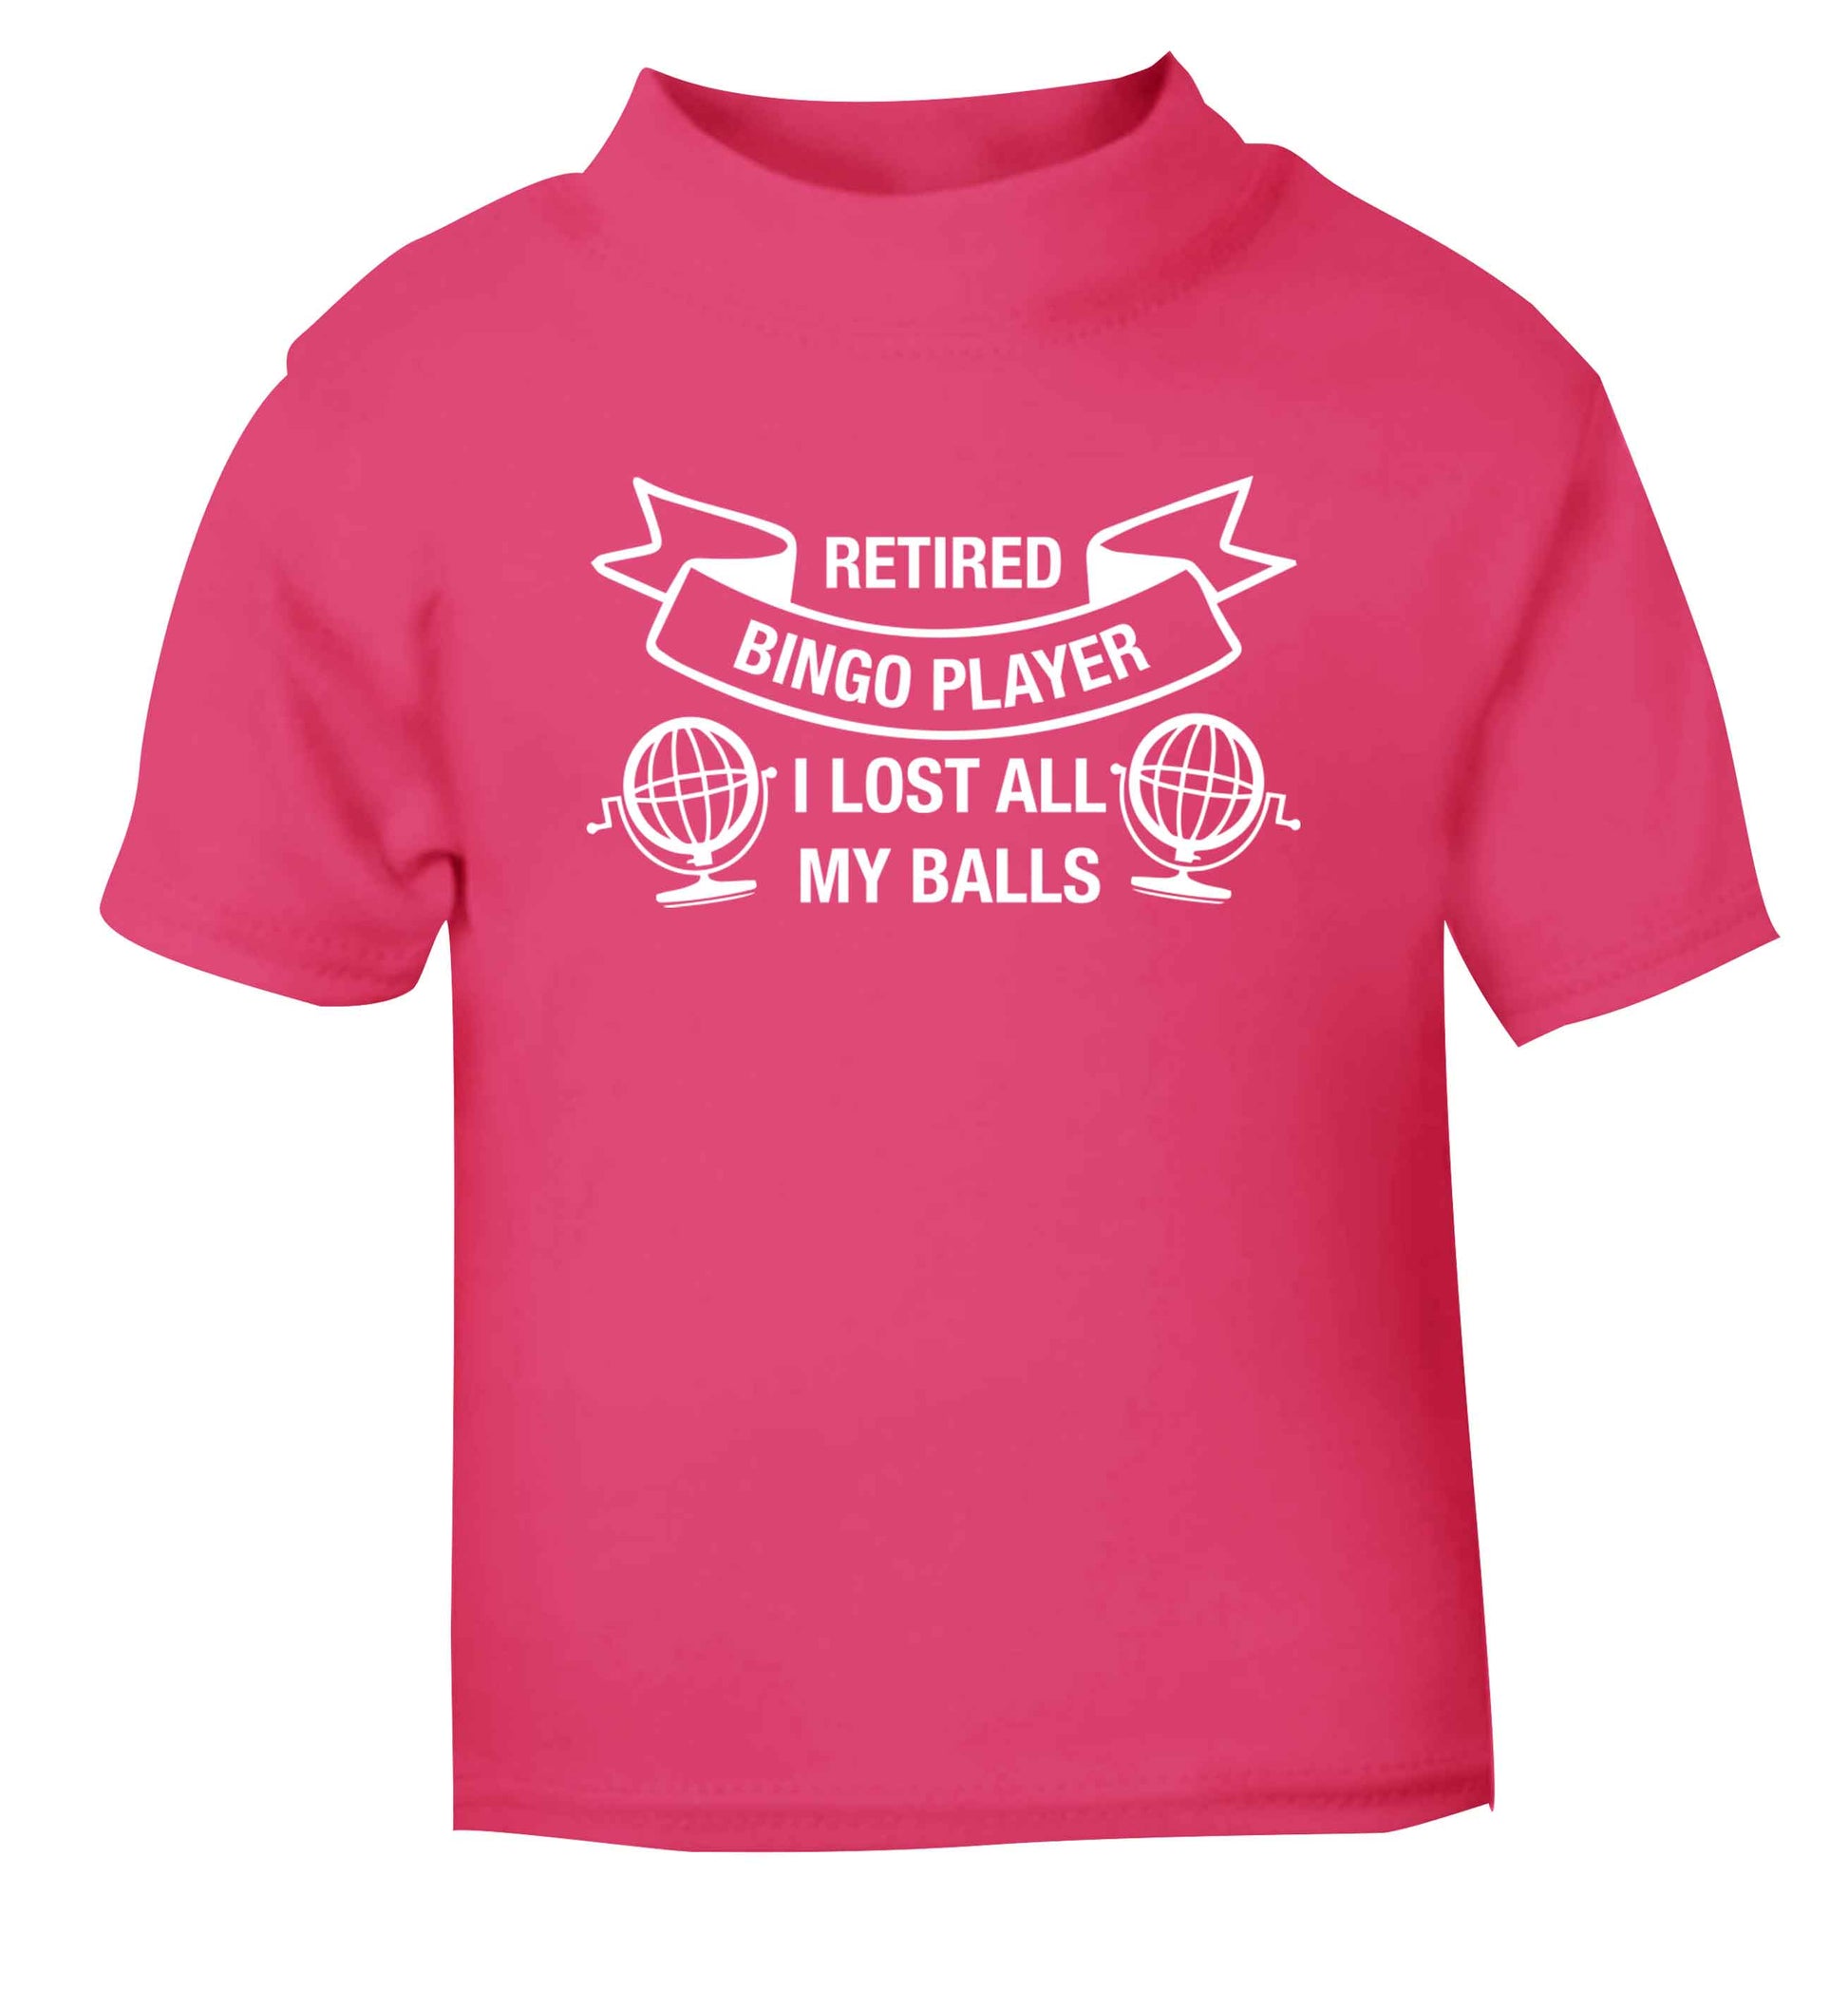 Retired bingo player I lost all my balls pink Baby Toddler Tshirt 2 Years